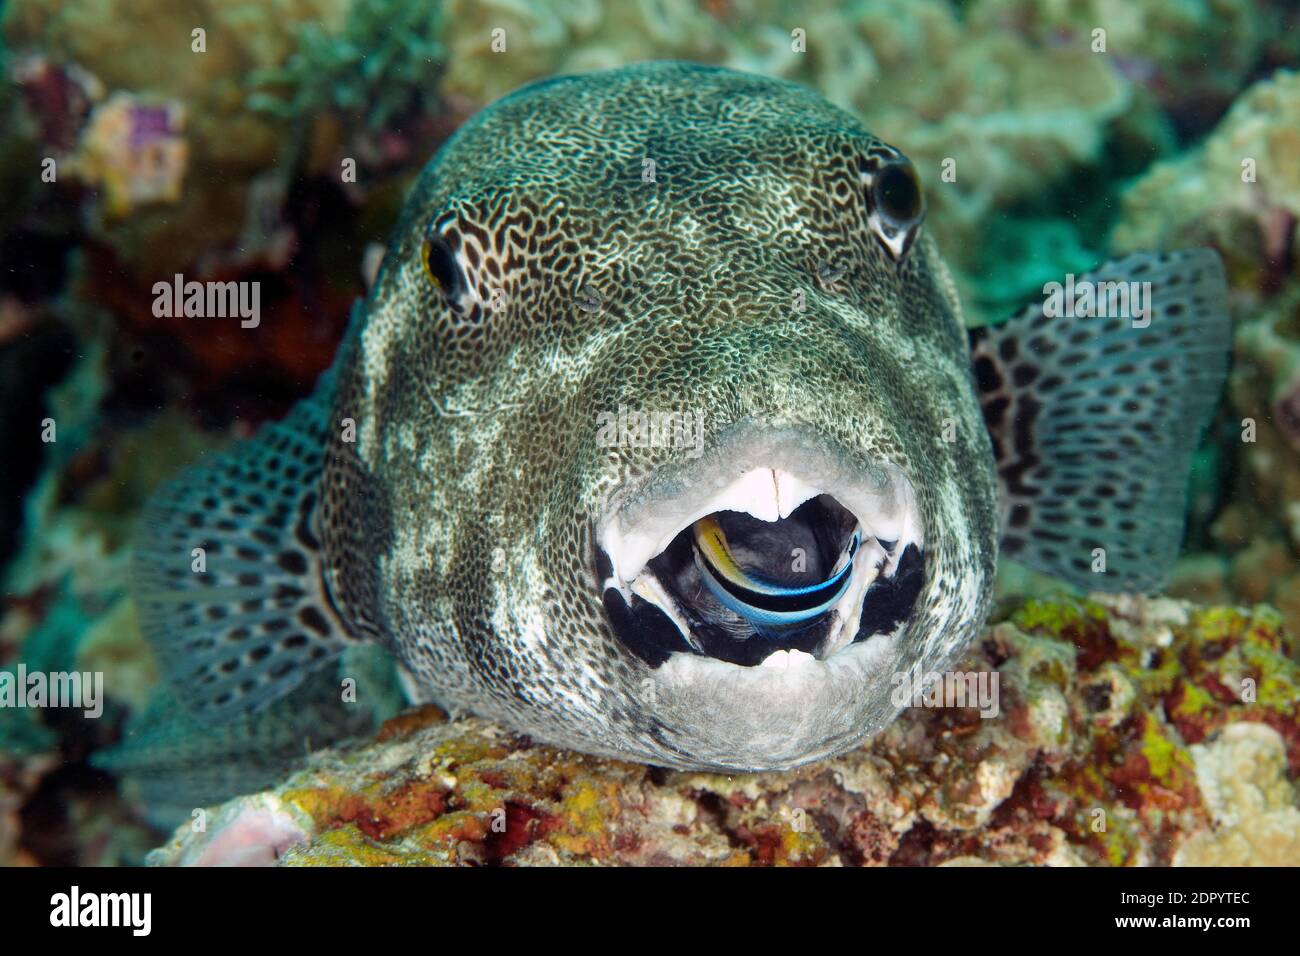 Star puffer (Arothron stellatus) and cleaner wrasse (Labroides dimidiatus) in open mouth, Indo-Pacific Ocean Stock Photo